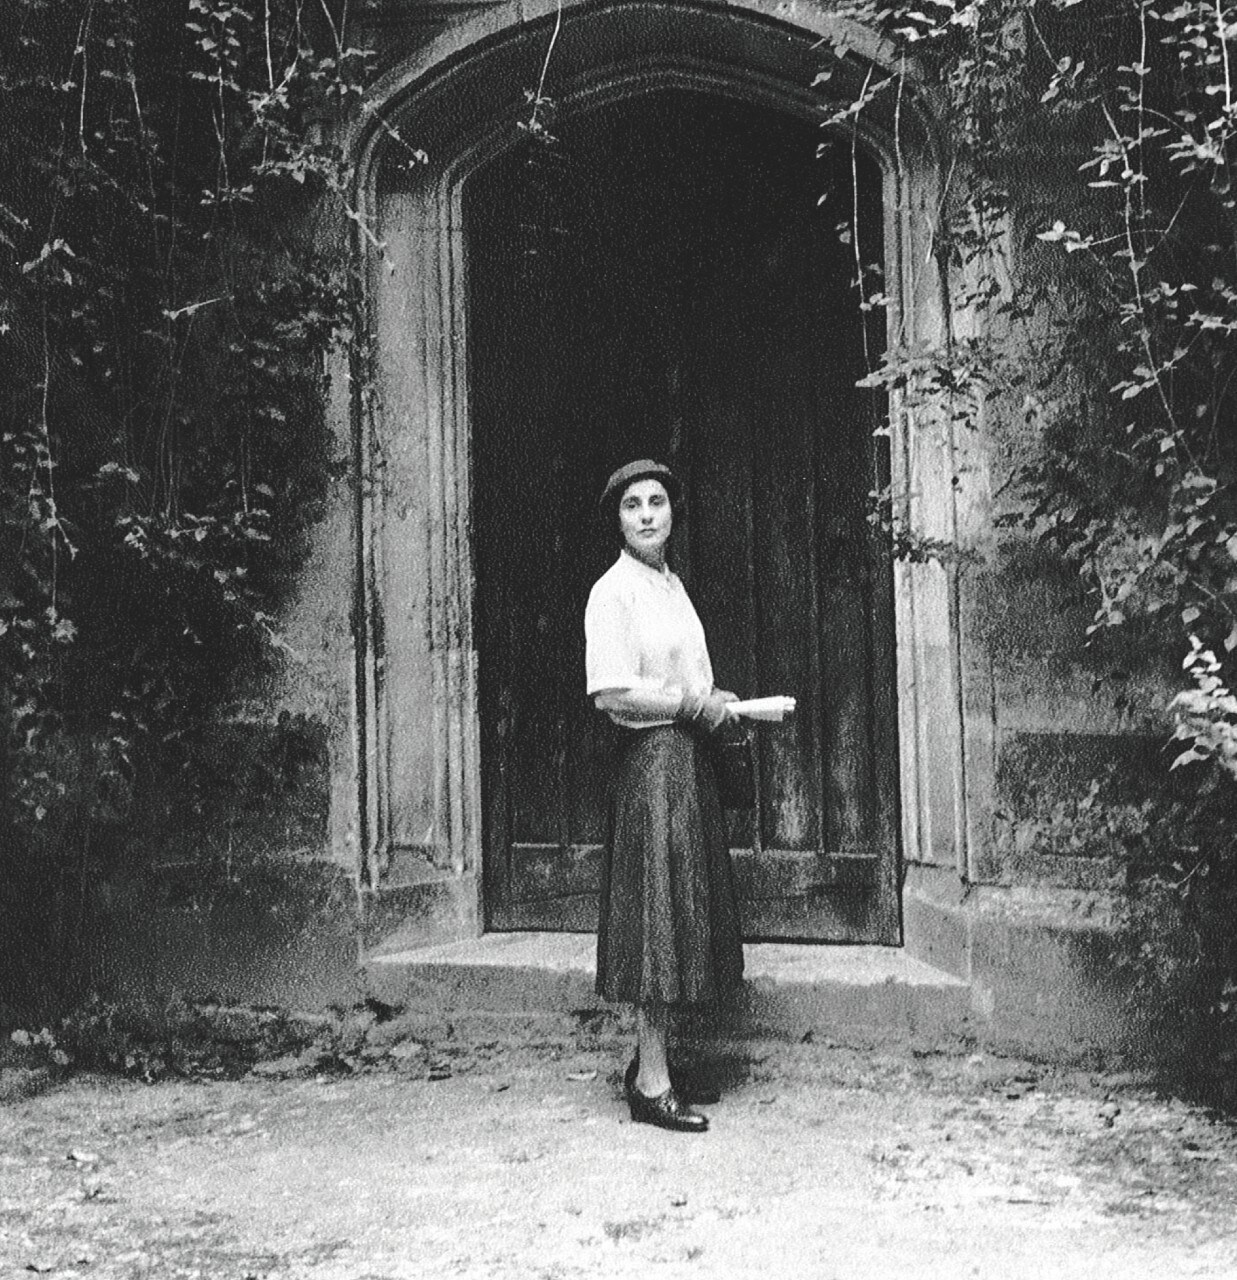 Black and white photo of University of Sydney bequestor, Elwin à Beckett, in front of Wilton House, Salisbury UK in 1956